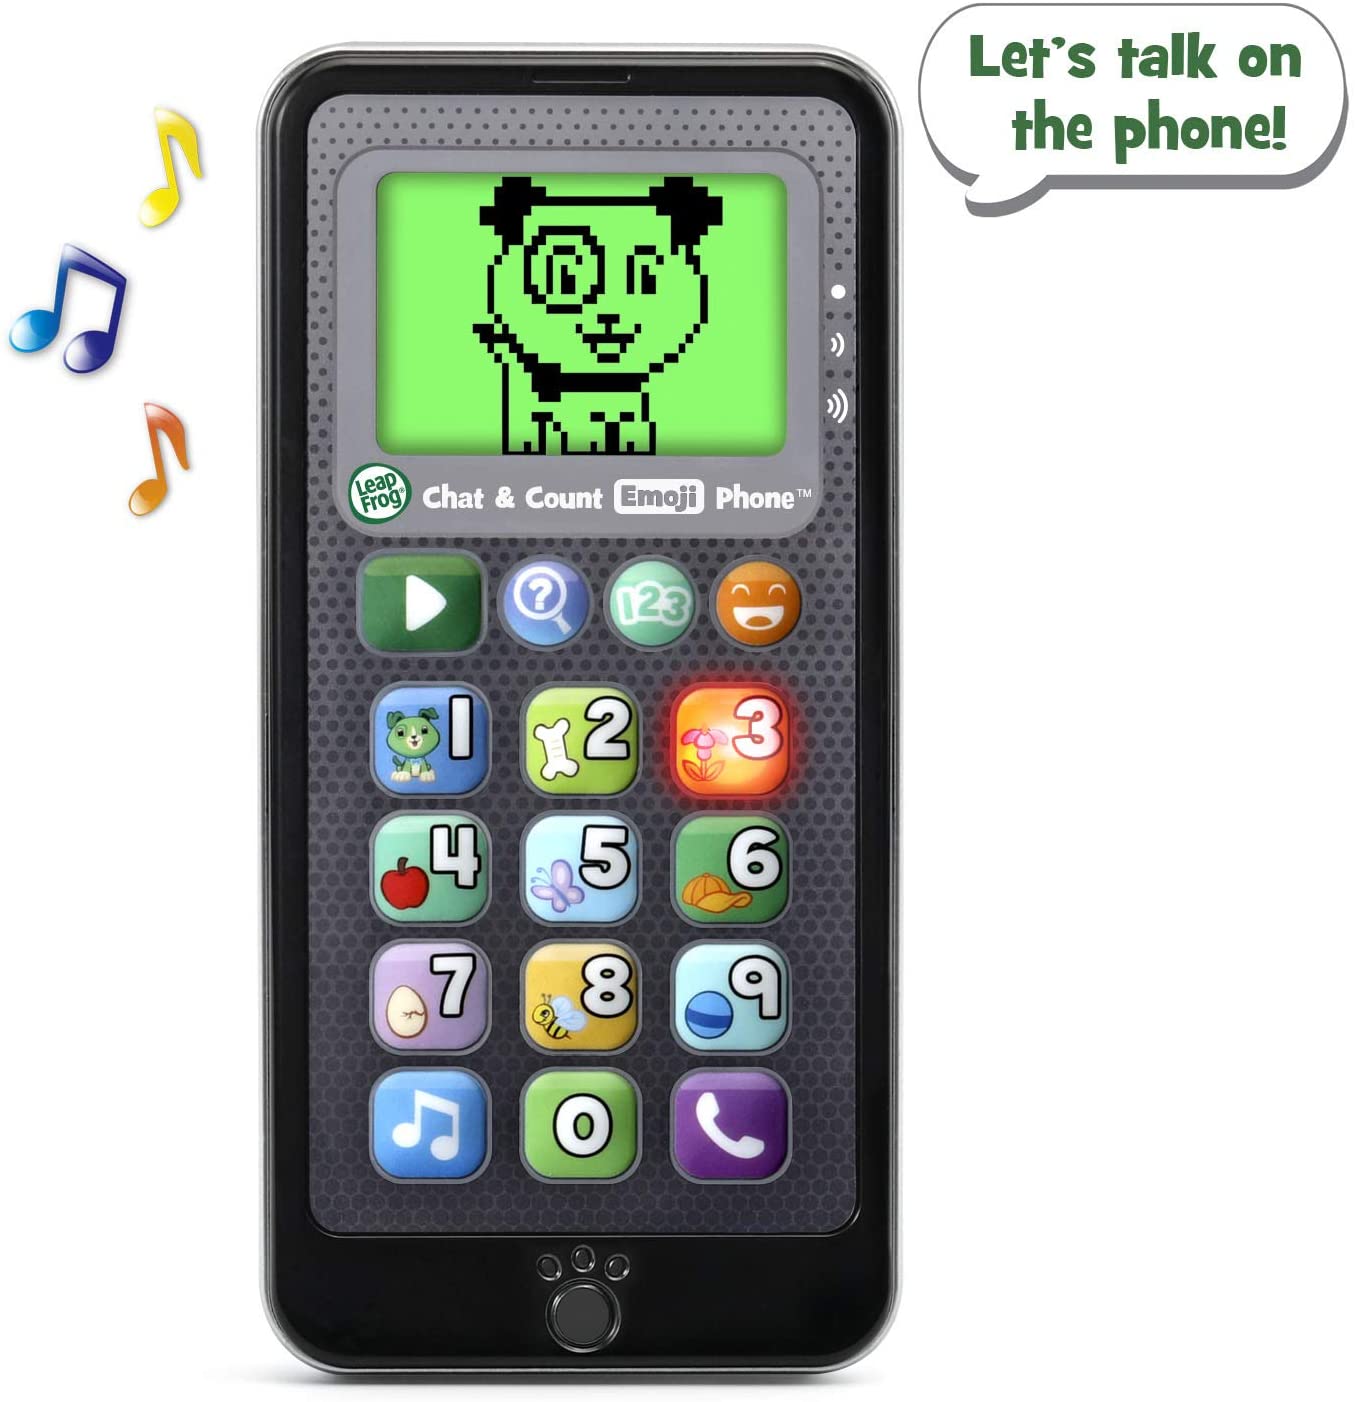 LeapFrog Chat and Count Emoji Phone, Black - For 18 Months and Up